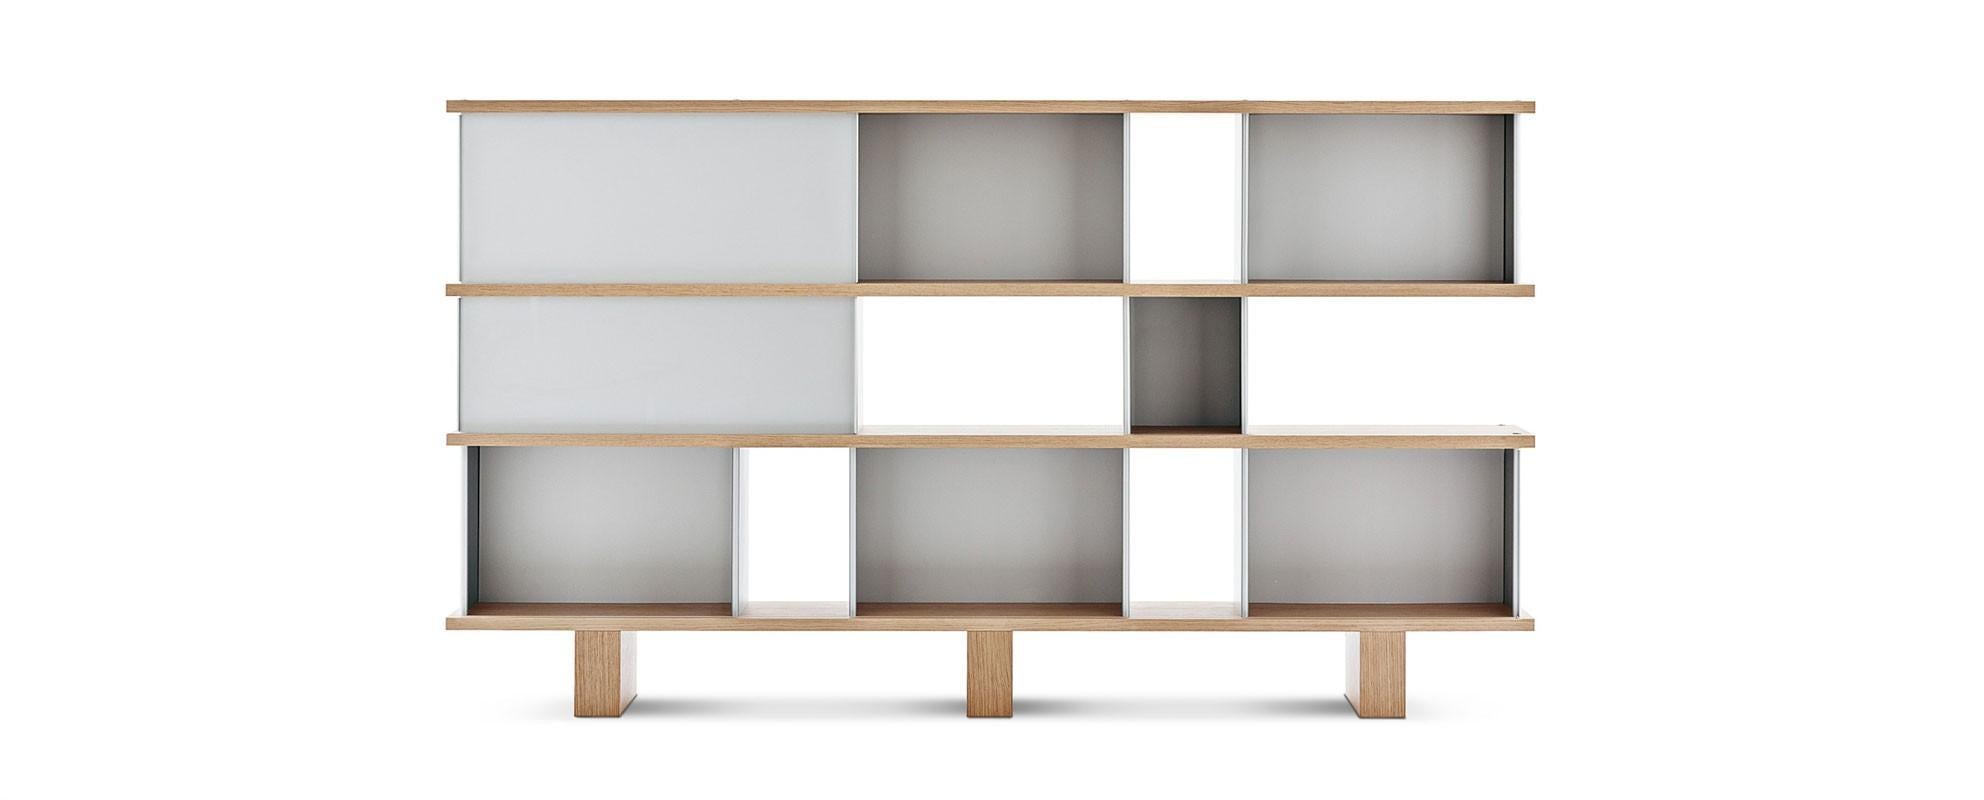 Shelving unit model Nuage designed by Charlotte Perriand in 1952-56. 
Relaunched by Cassina in 2012.
Manufactured by Cassina in Italy.

Authenticity and avant-garde characterise Charlotte Perriand’s Nuage shelving unit from 1940. Drawing on her